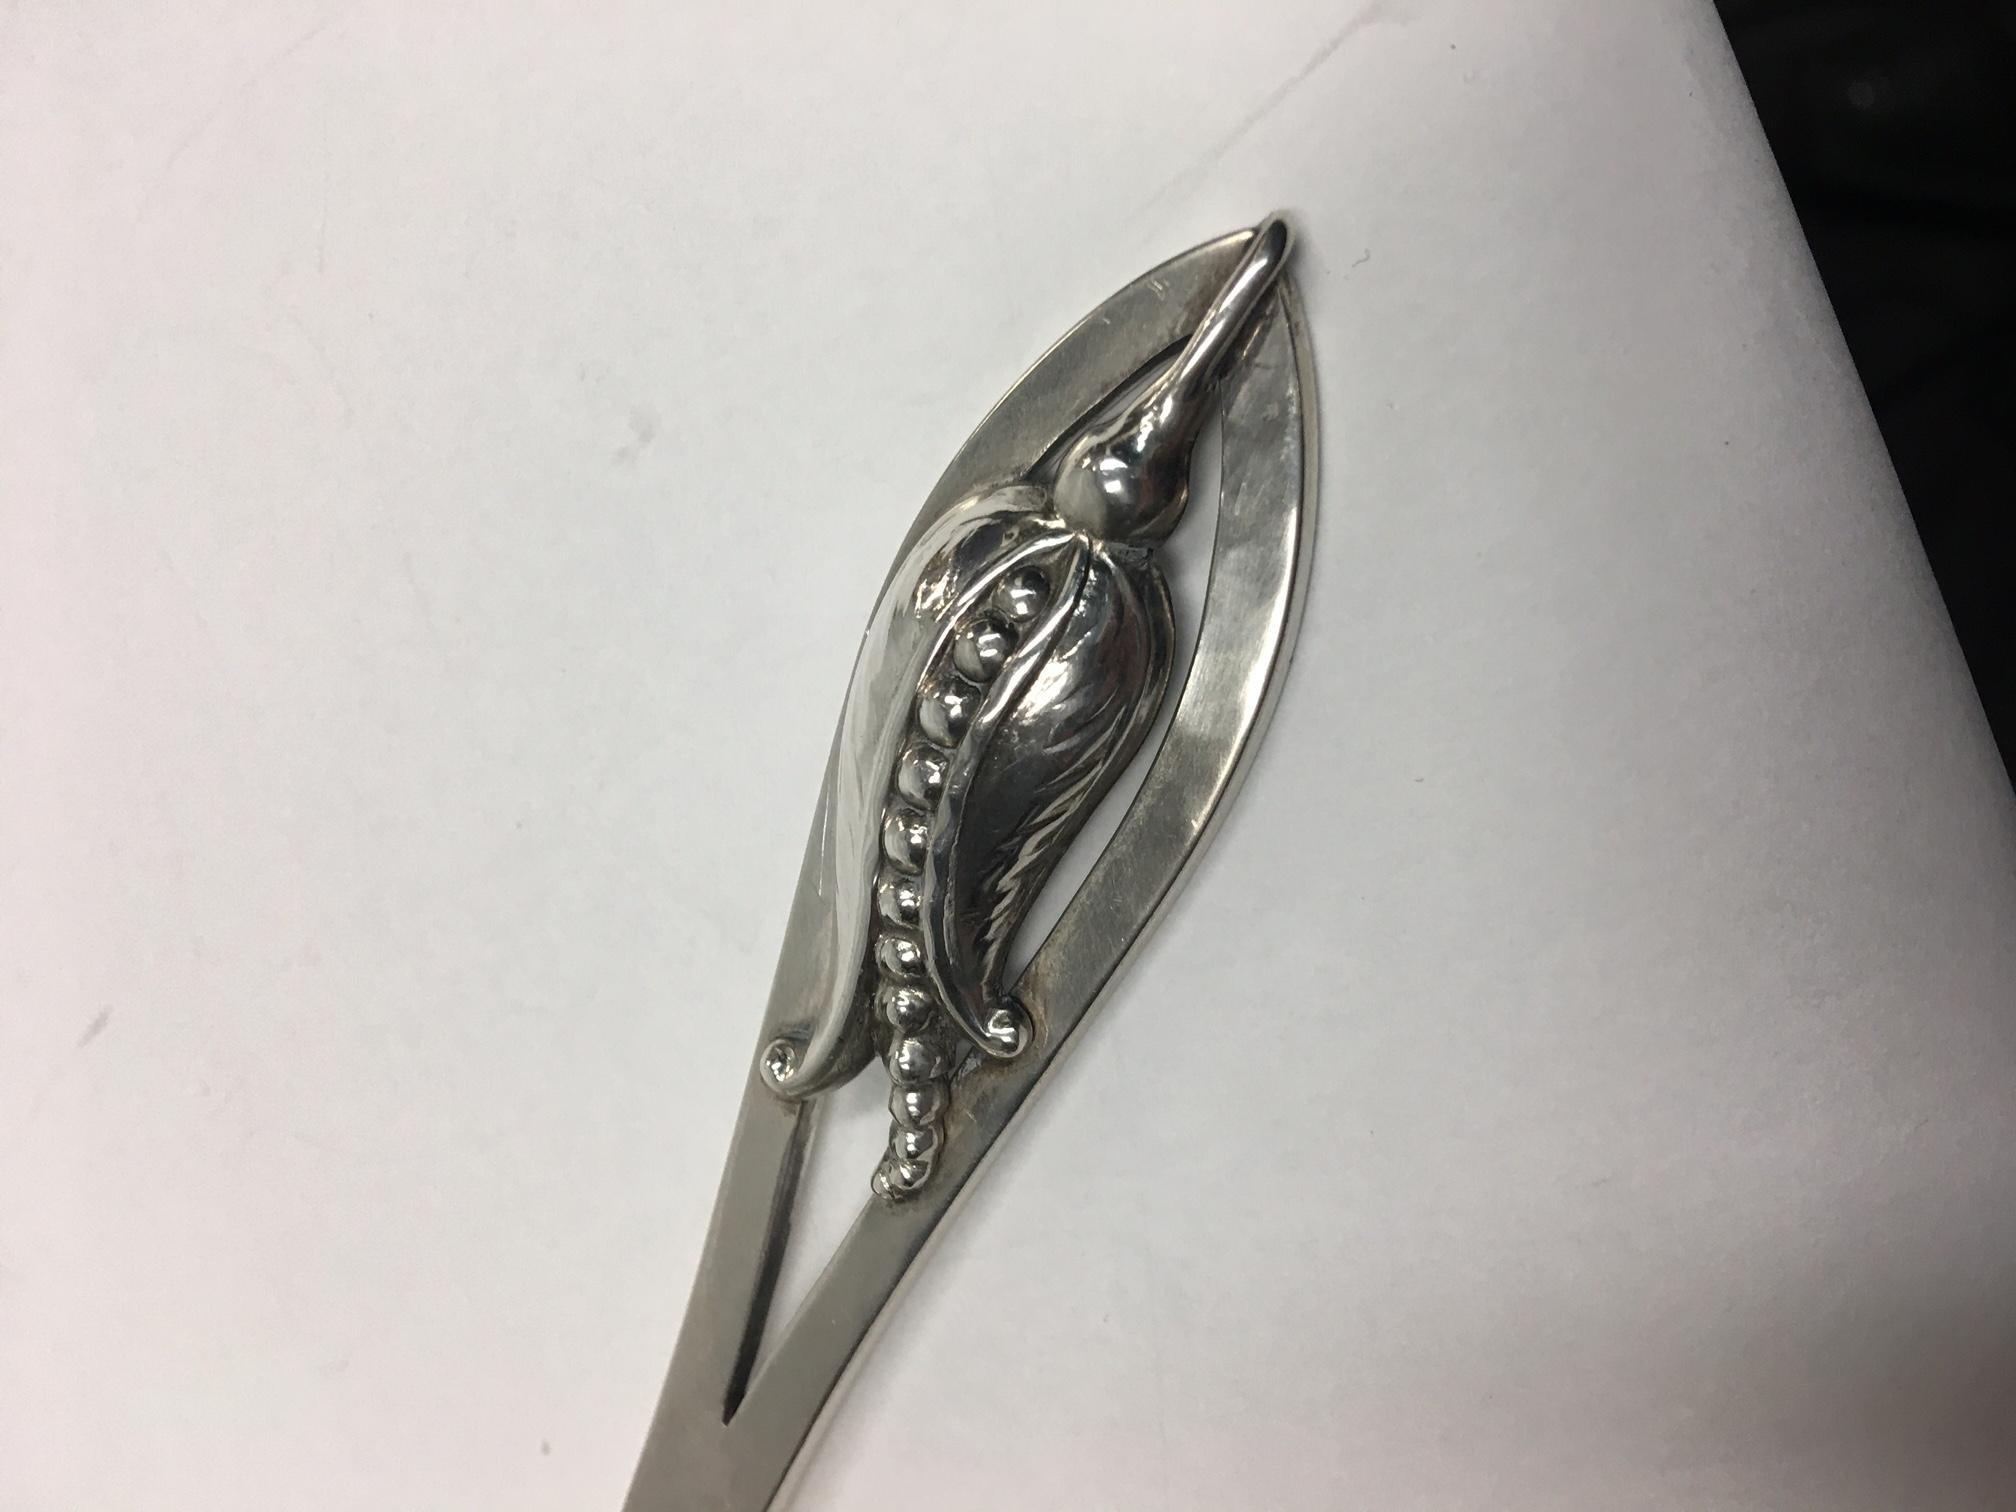 Carl Poul Petersen sterling silver sauce ladle in his iconic blossom corn flower pattern. Hand-hammered. Measuring approx. 7.75